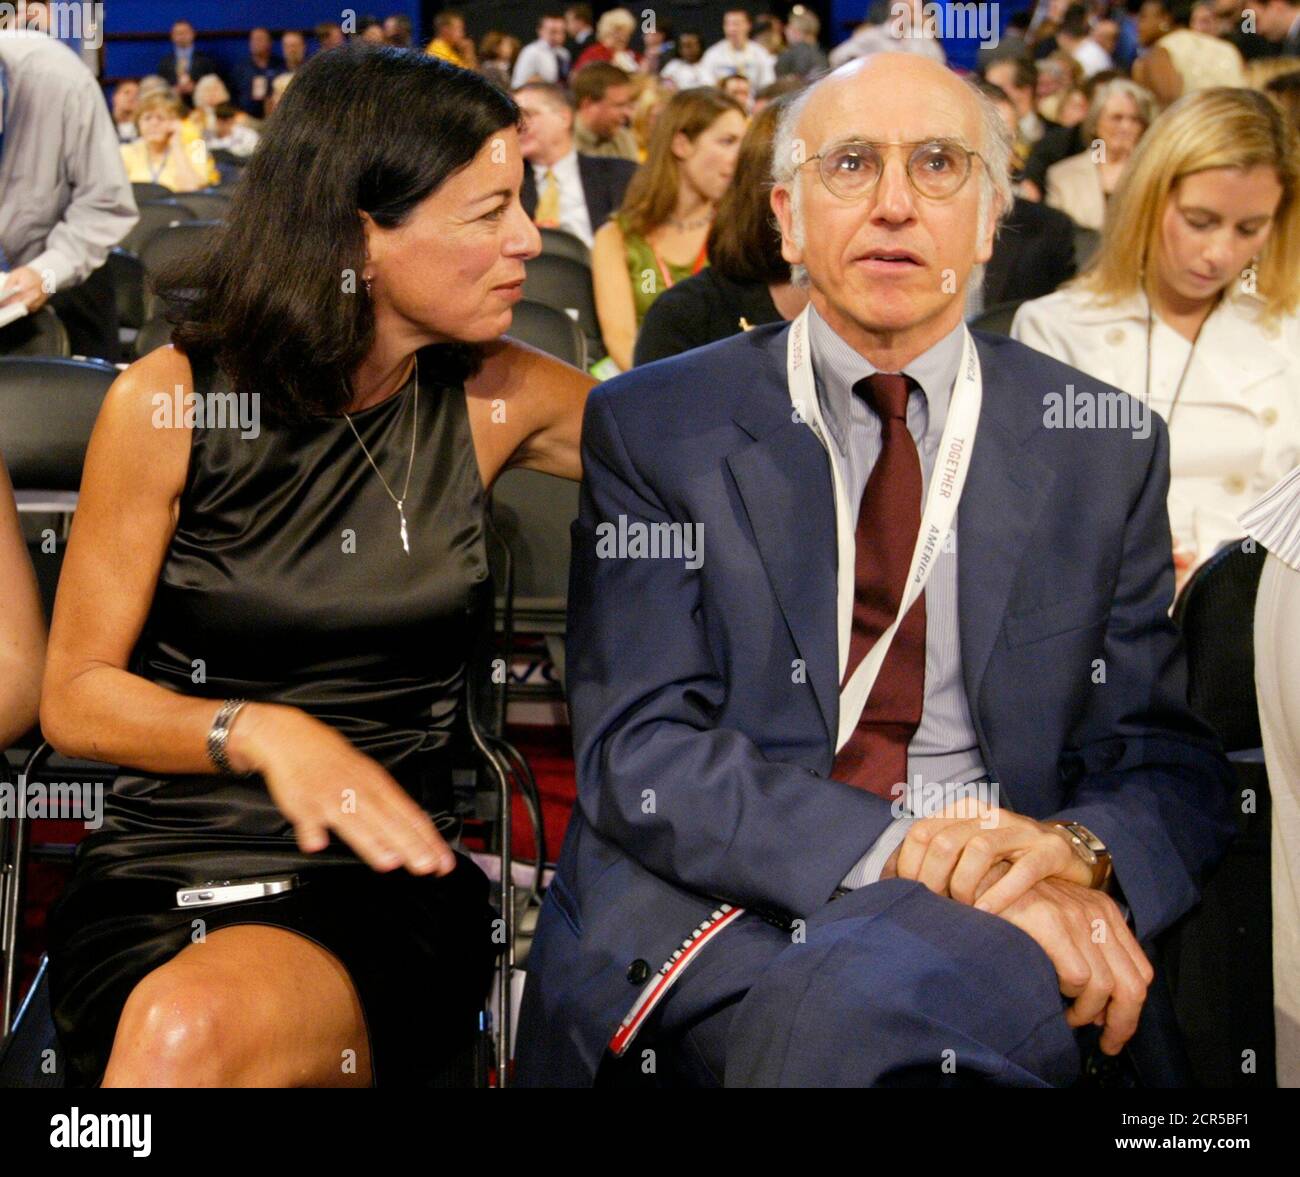 Actor Larry David, of the television program 'Curb Your Enthusiasm,' and his wife Laurie attend the third day of the 2004 Democratic National Convention at the FleetCenter in Boston, July 28, 2004. John Kerry arrived in Boston on Wednesday to be formally be anointed as the Democratic challenger to President Bush on a night when his running mate John Edwards takes center stage for the biggest speech of his career. REUTERS/John Gress US ELECTION  HB/ Stock Photo